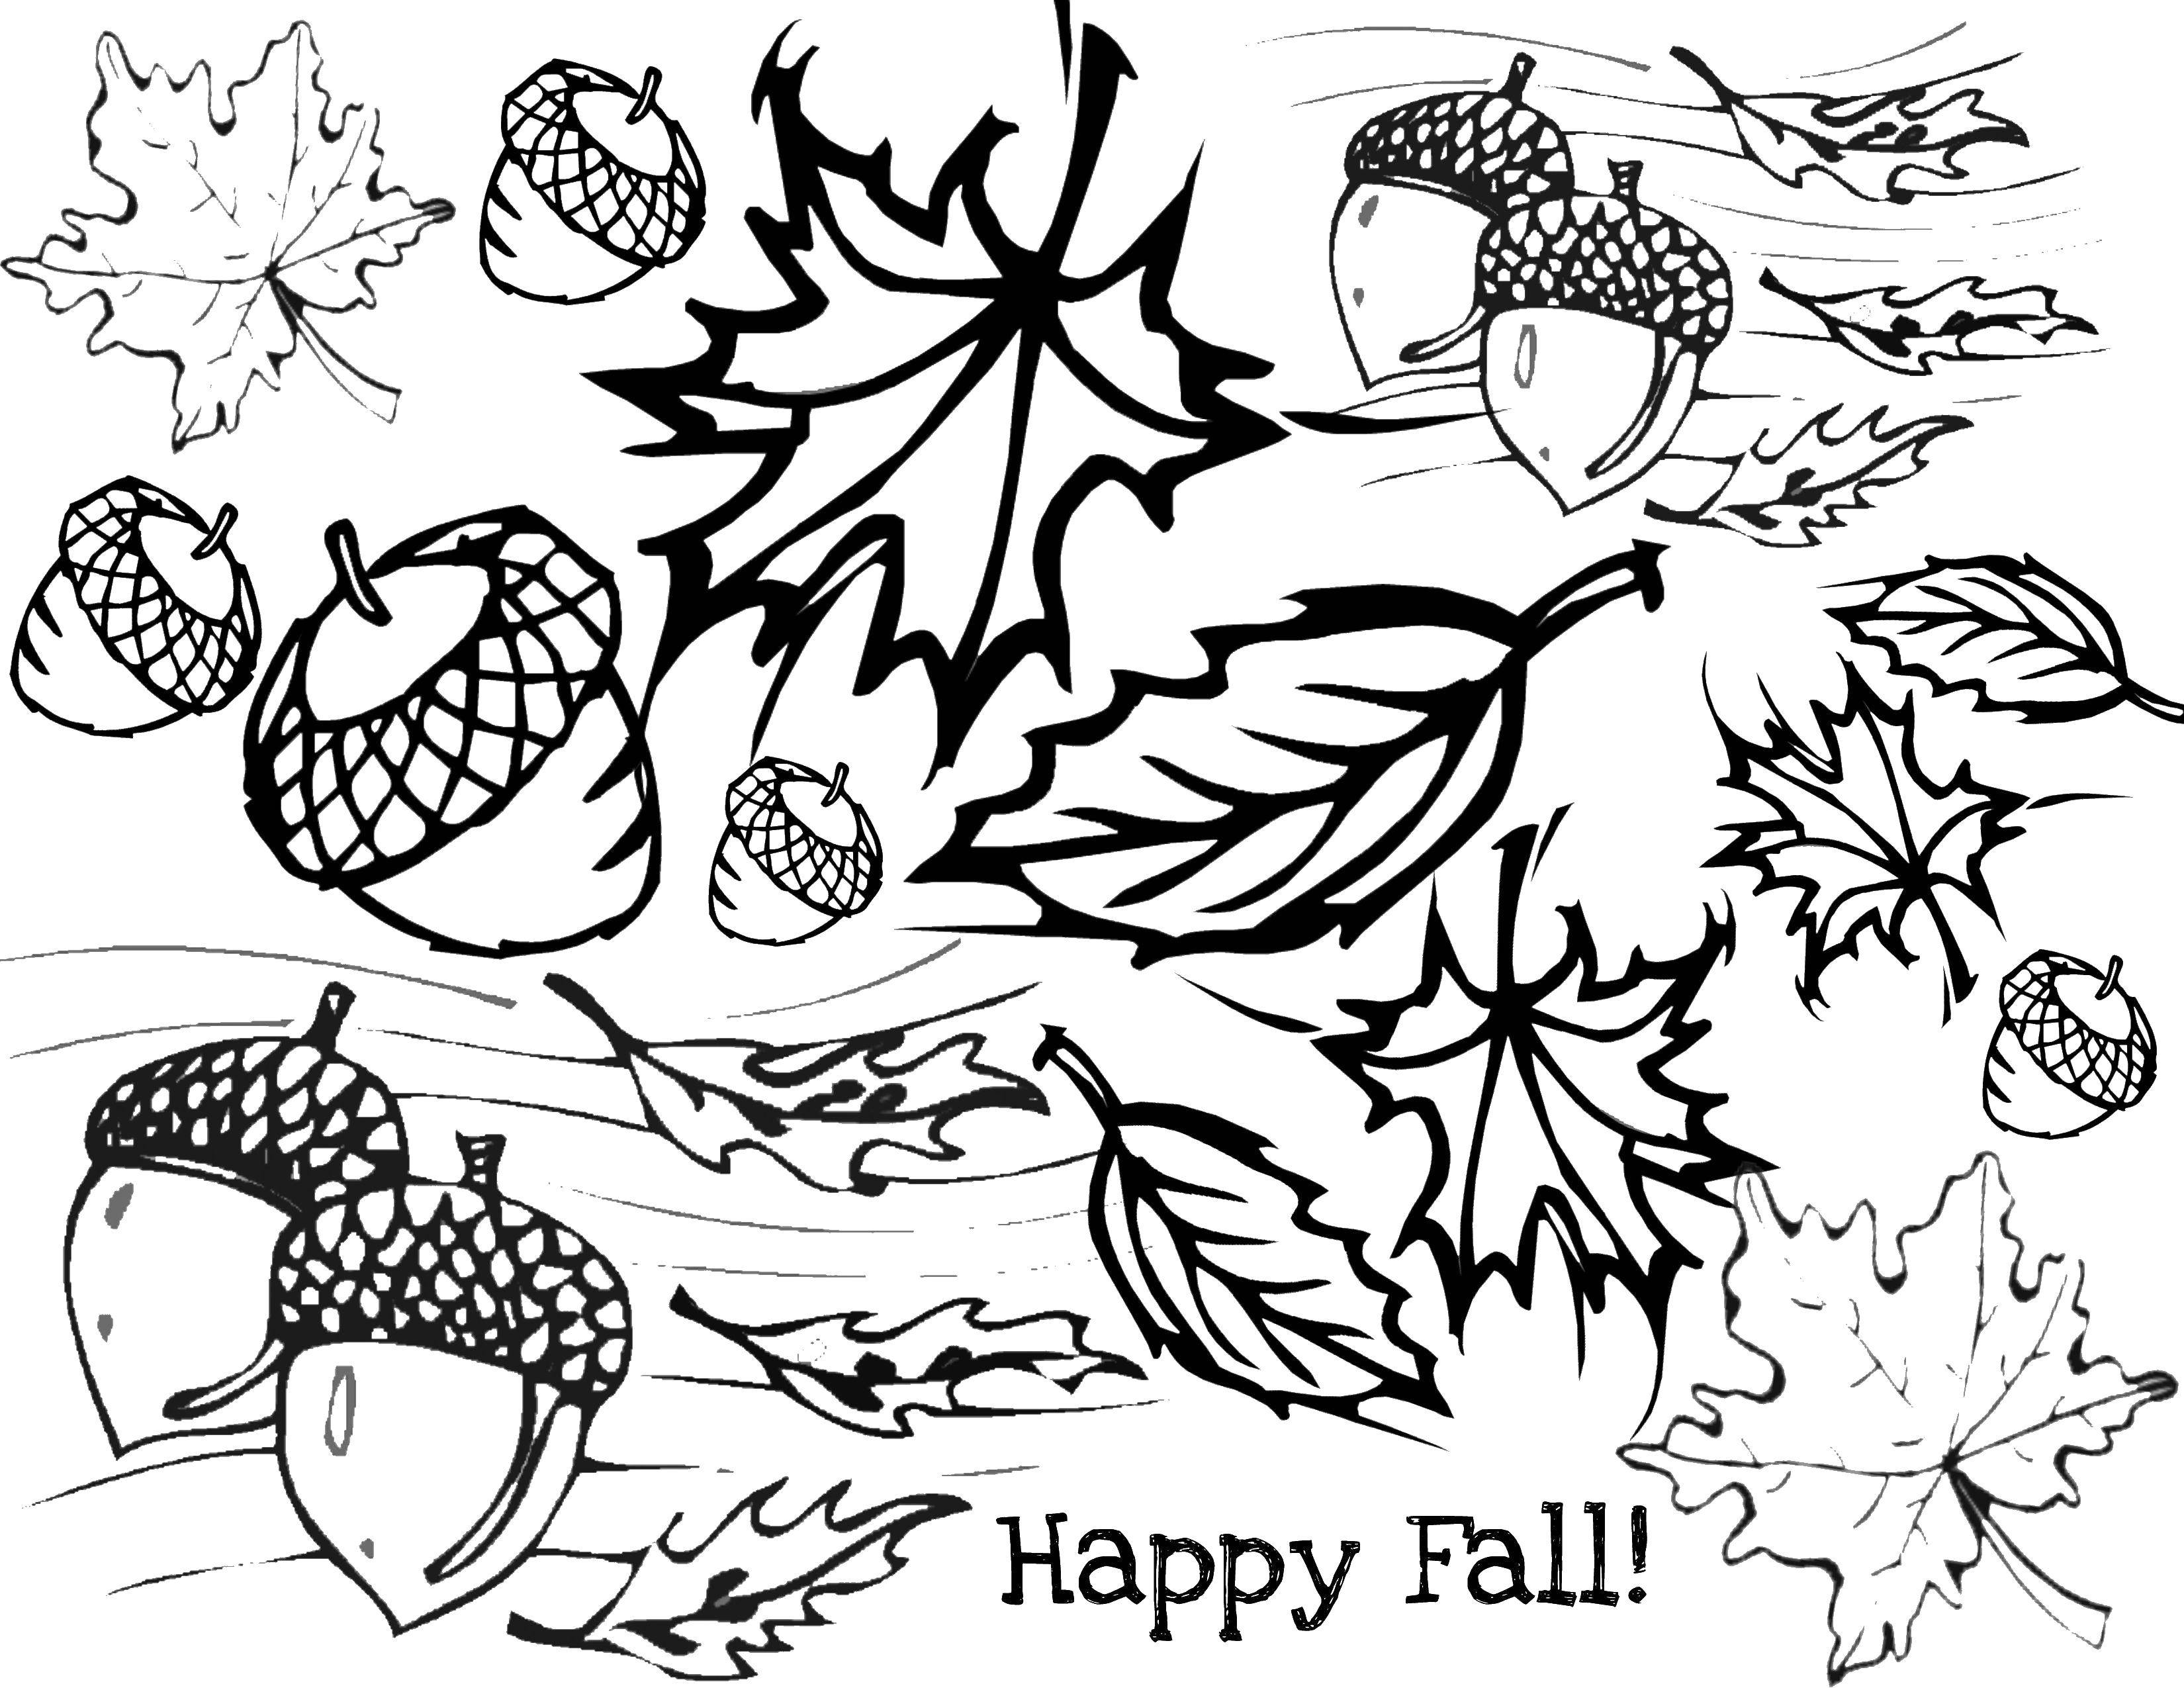 Coloring Falling leaves and acorns. Category Autumn. Tags:  autumn, acorn.